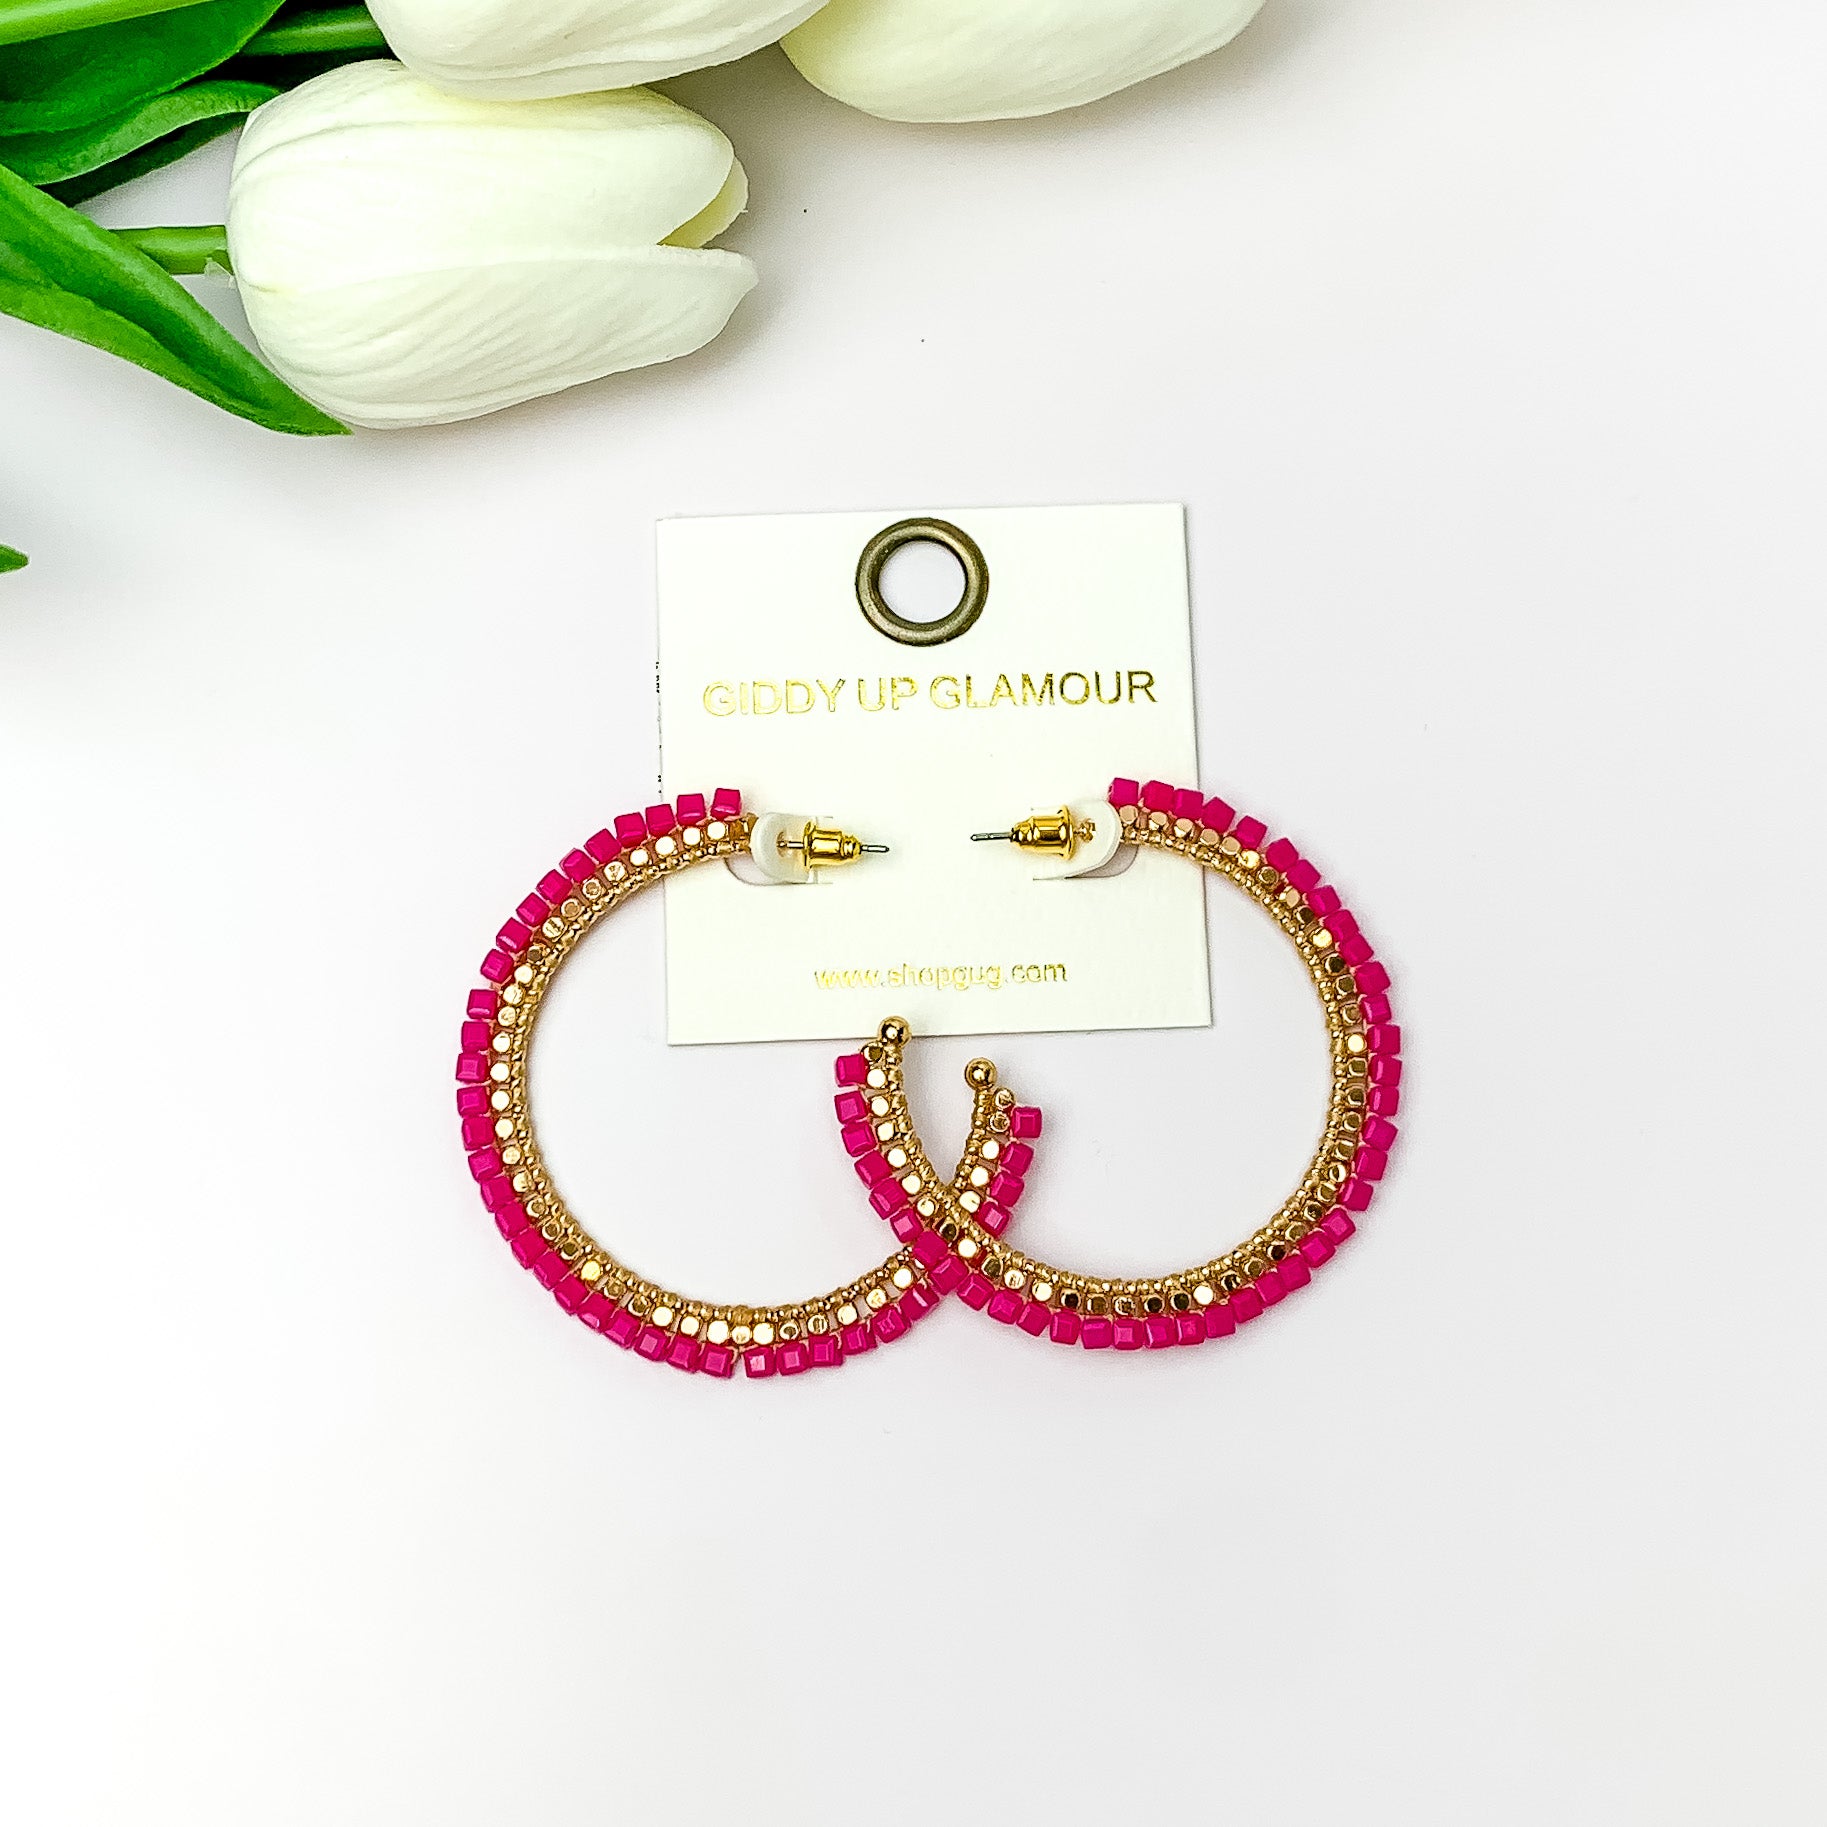 Pictured are circle gold toned hoop earrings with gold beads around it and hot pink crystal outline. They are pictured with white flowers on a white background.